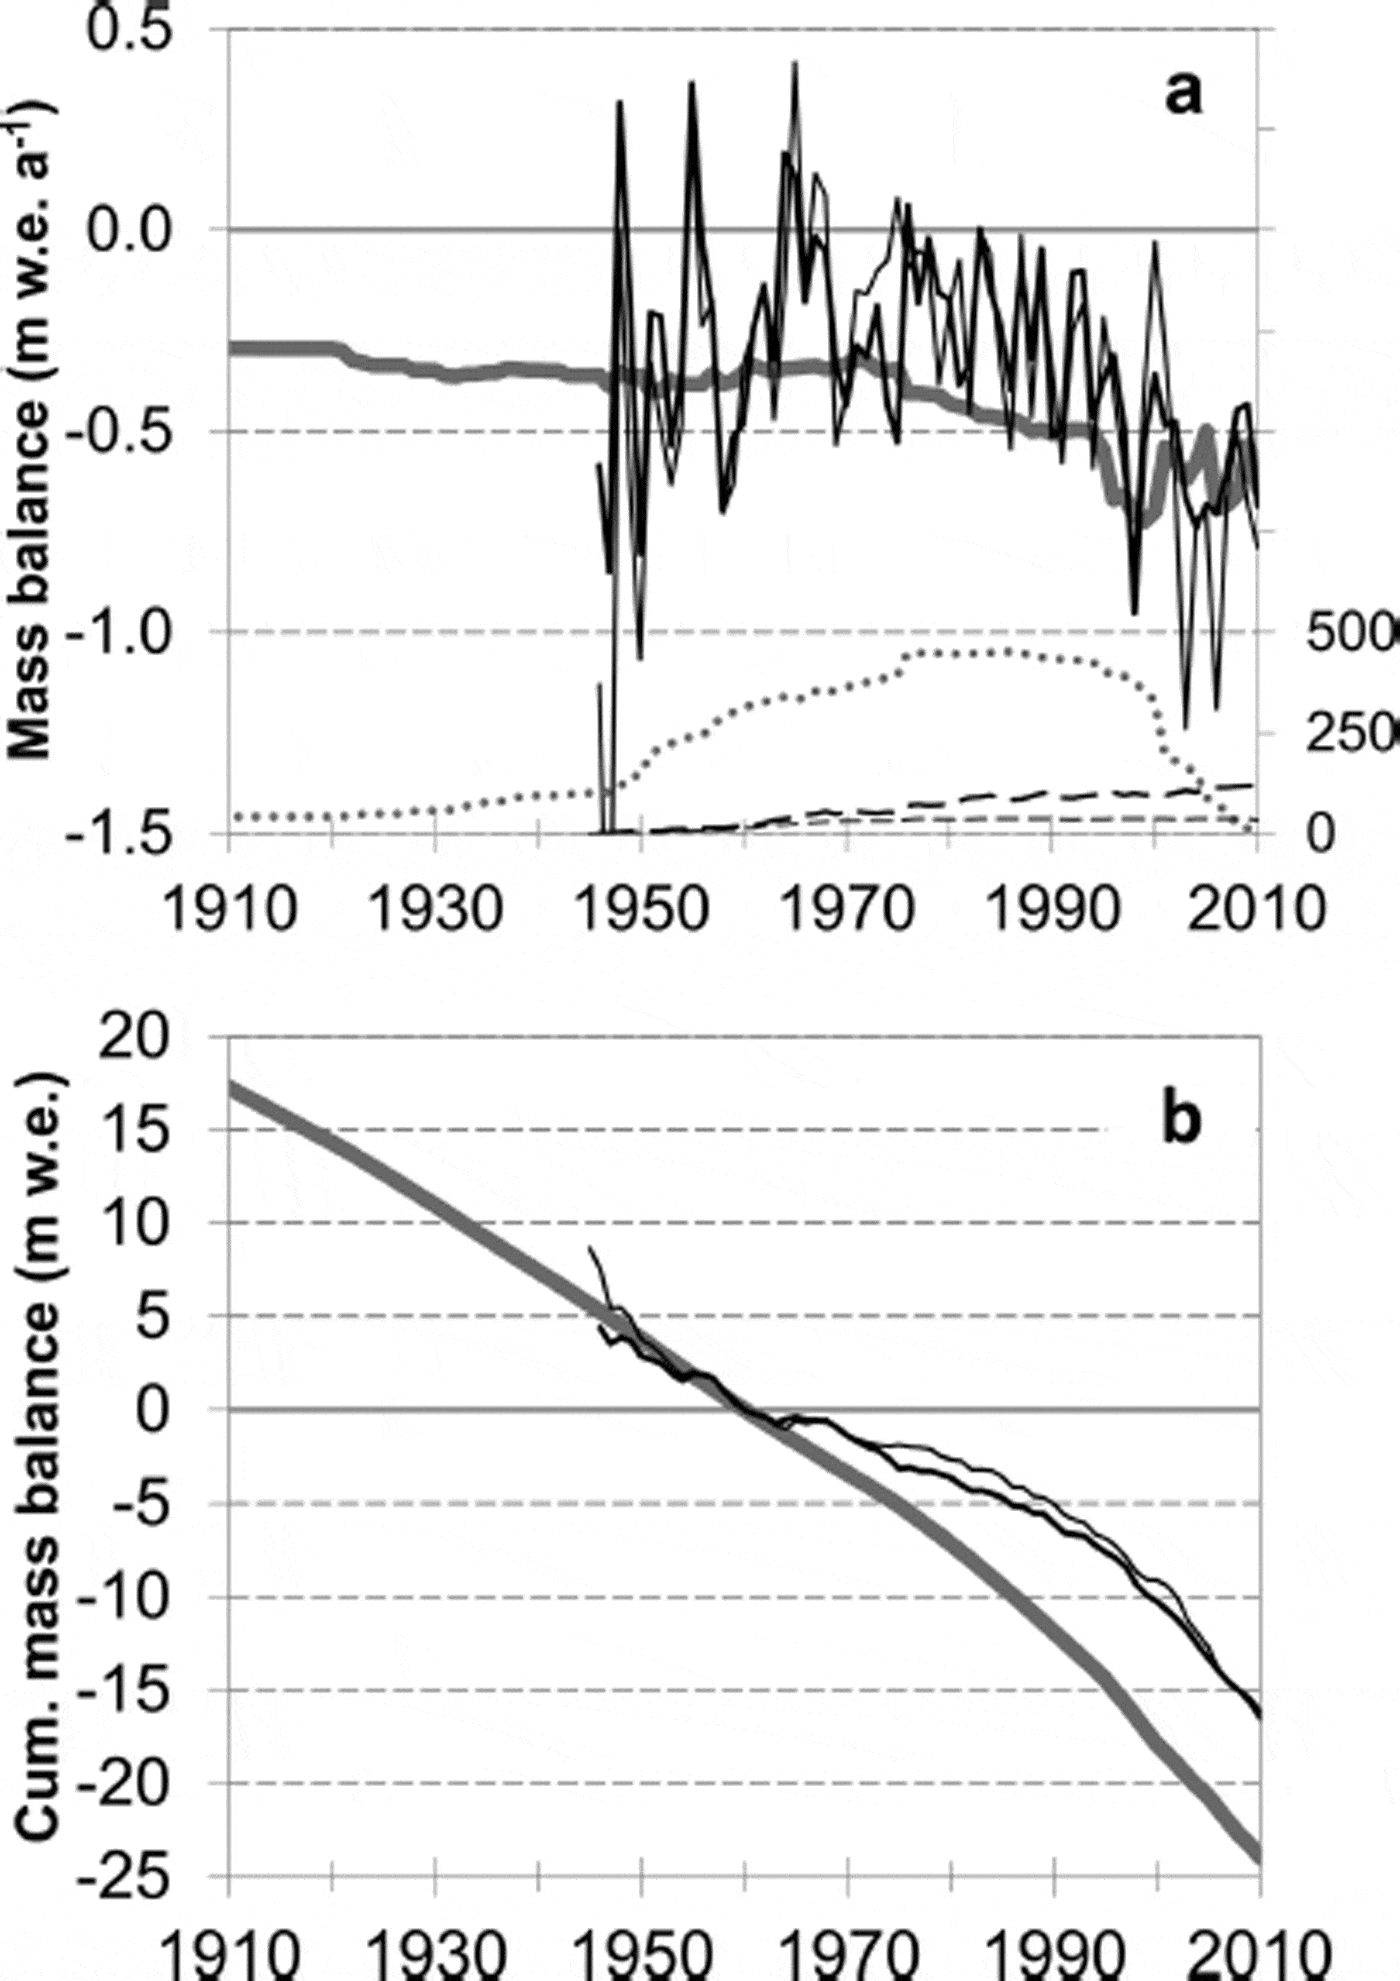 Historically Unprecedented Global Glacier Decline In The Early 21st Century Journal Of 4536